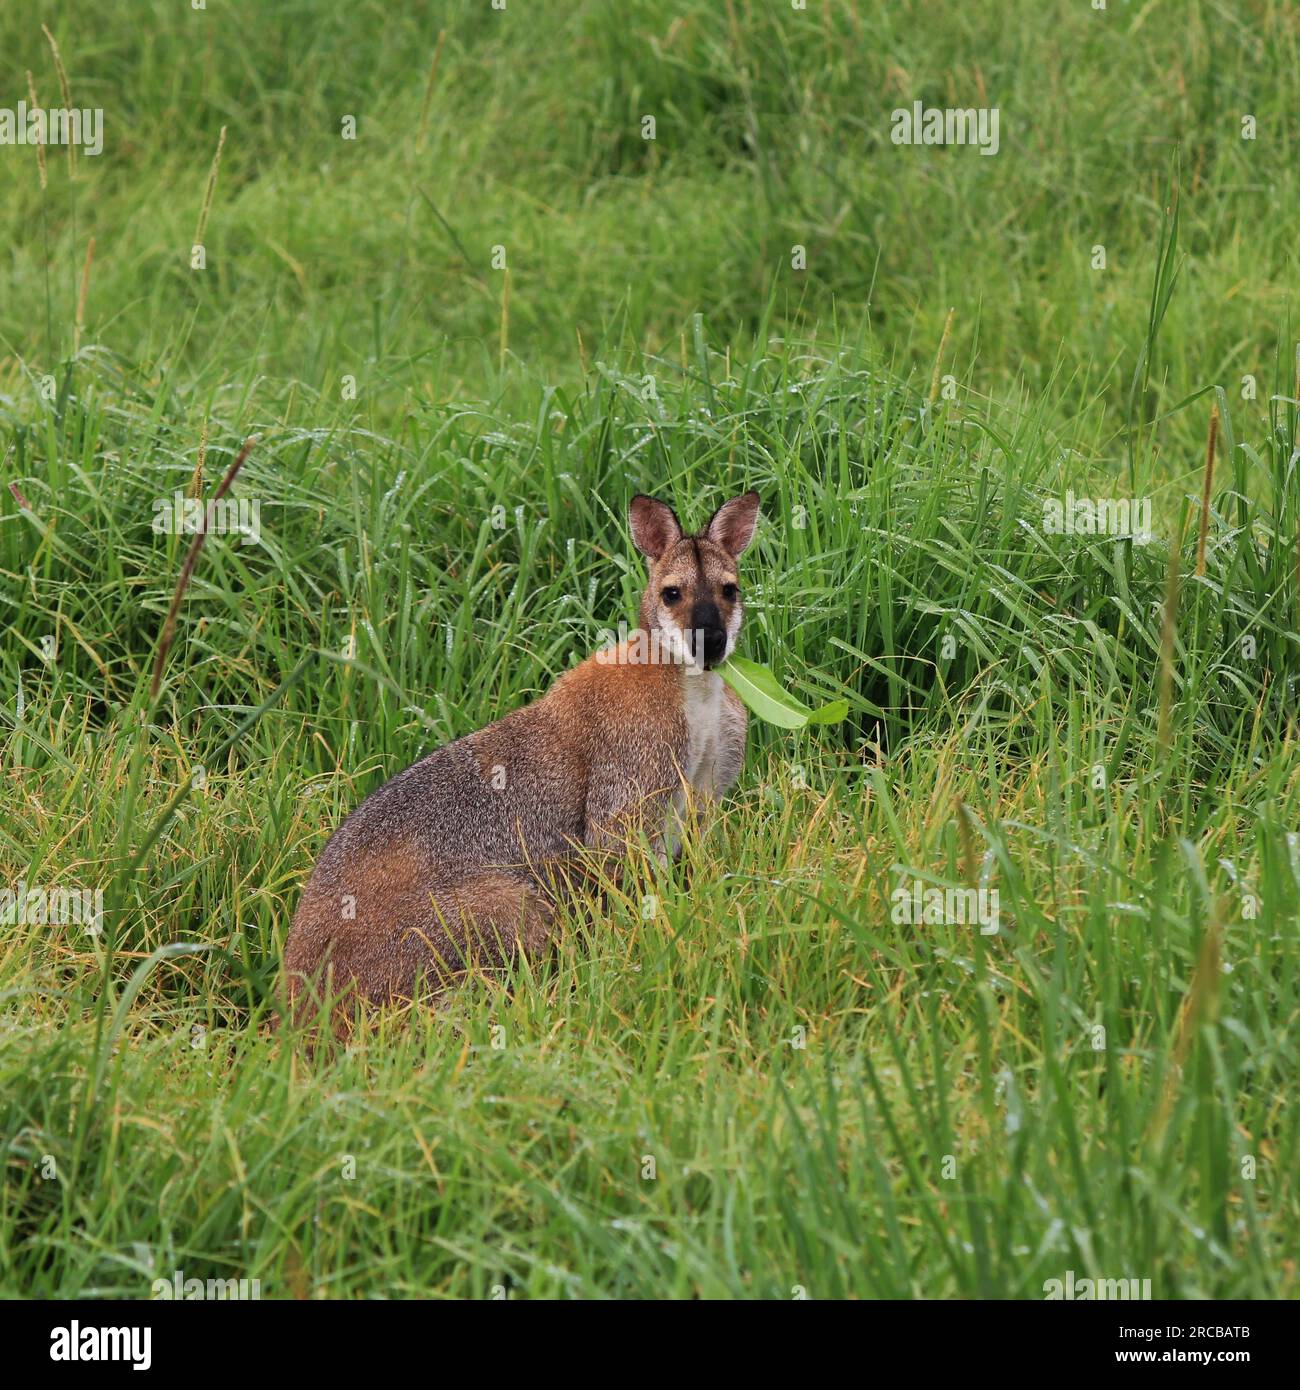 Small kangaroo grazing on a meadow with high grass in New South Wales, United Kingdom Stock Photo